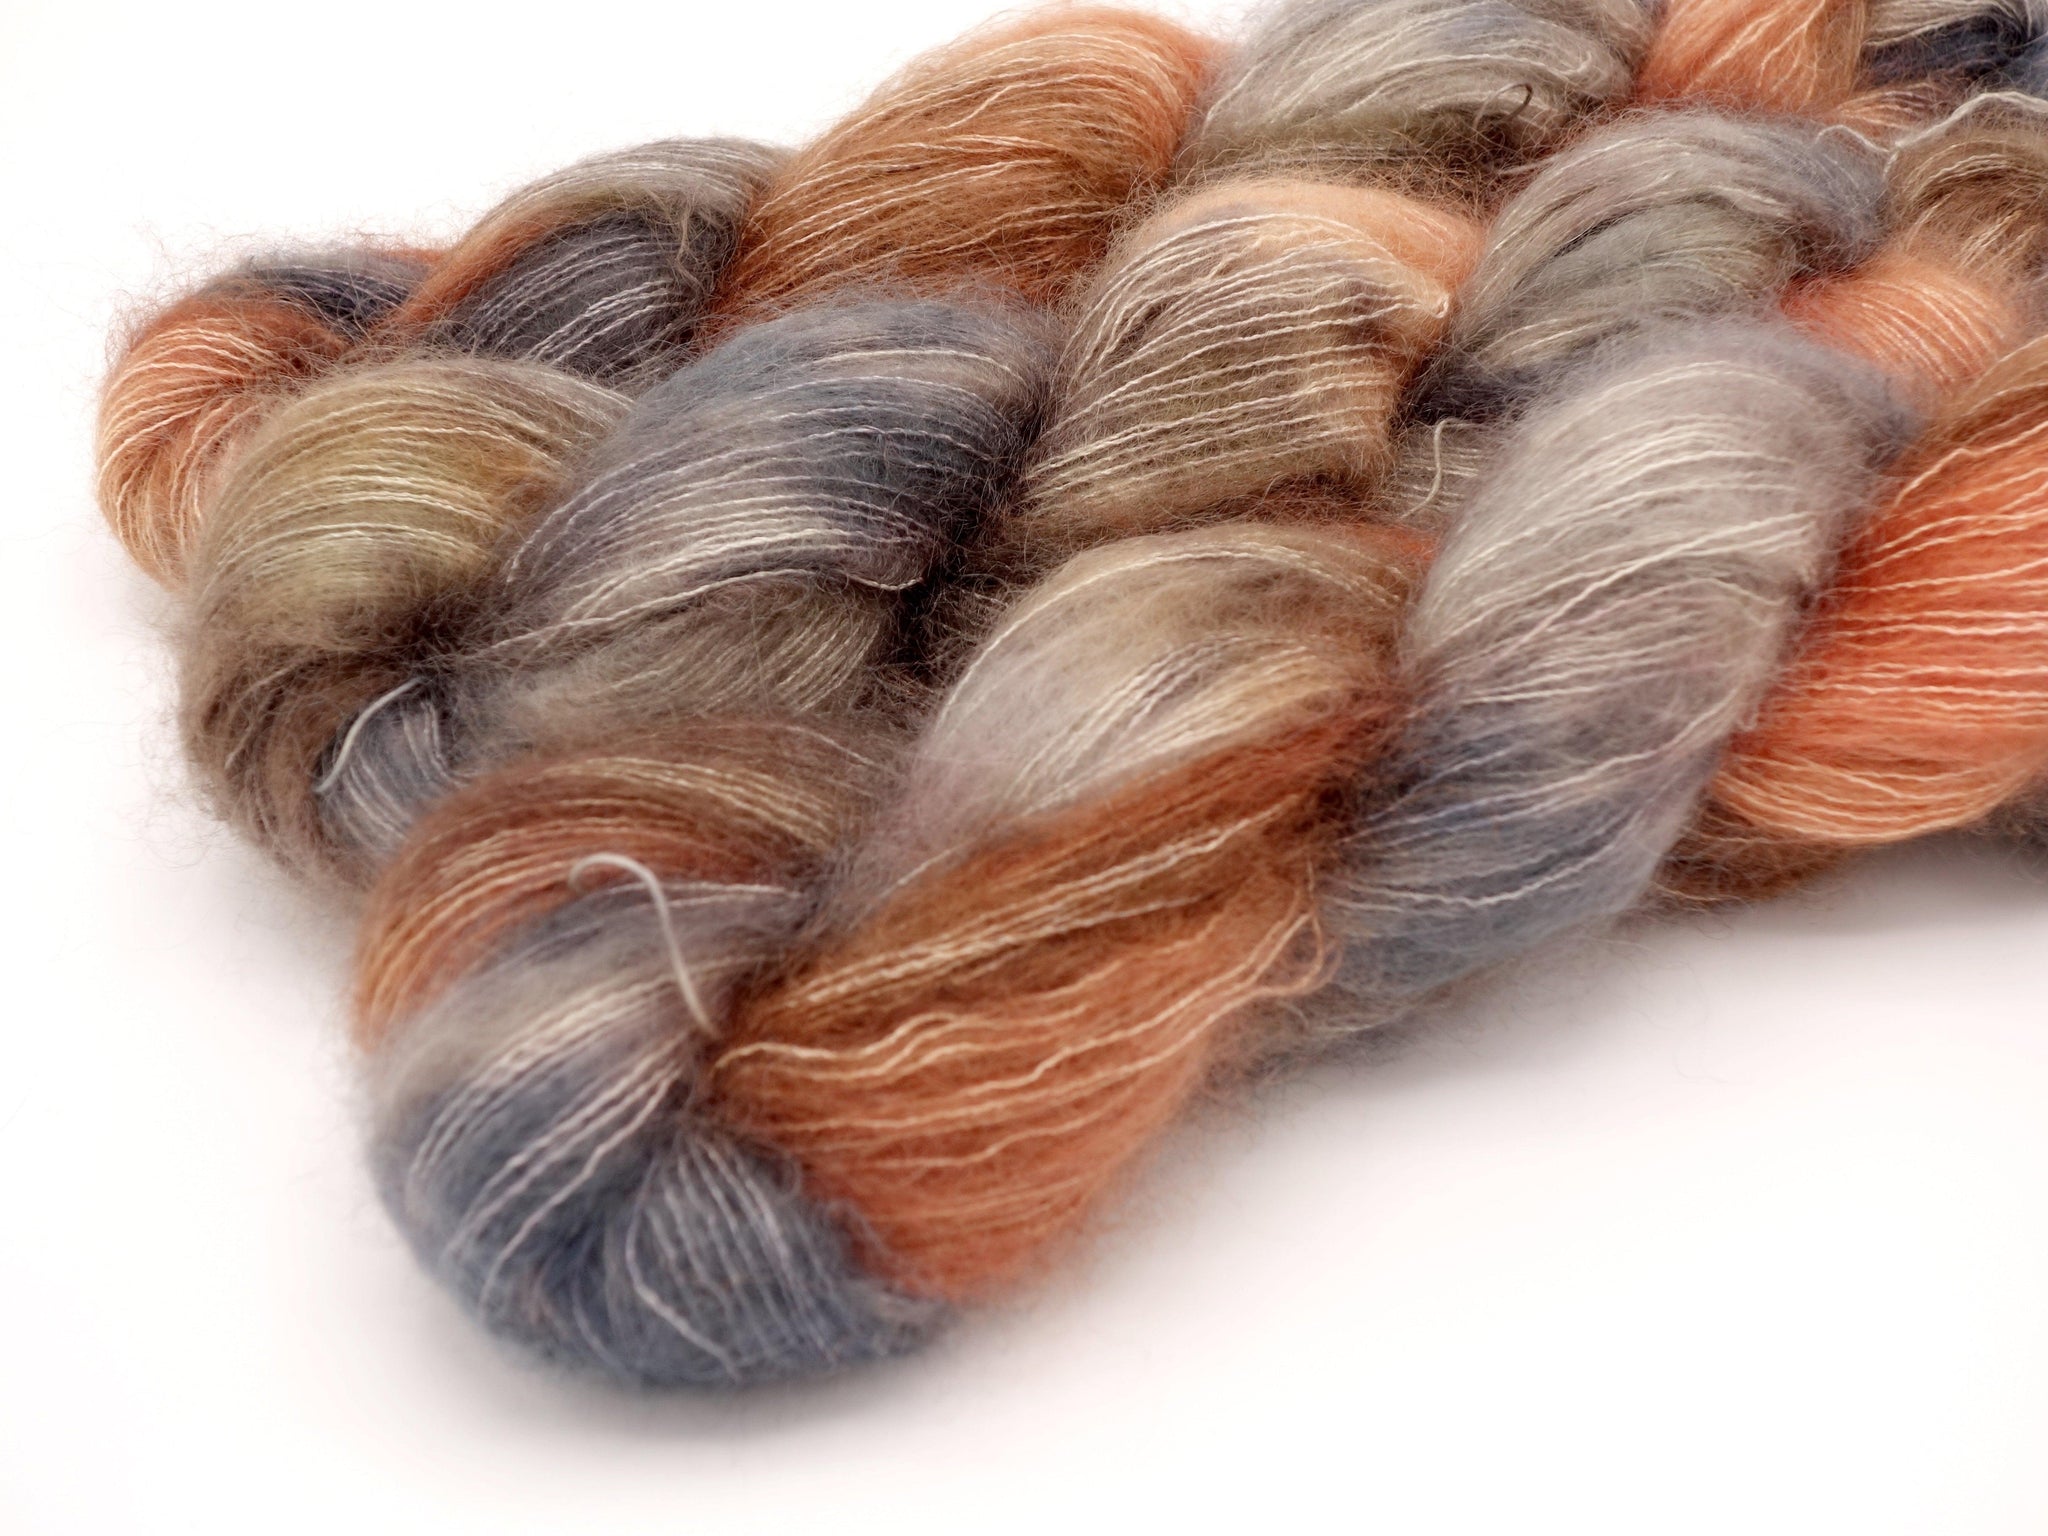 Skeins of Murky Depths Mirage The Dreamtime, a variegated yarn in tones of pale orange, brighter orange and browns with purply blue greys. 